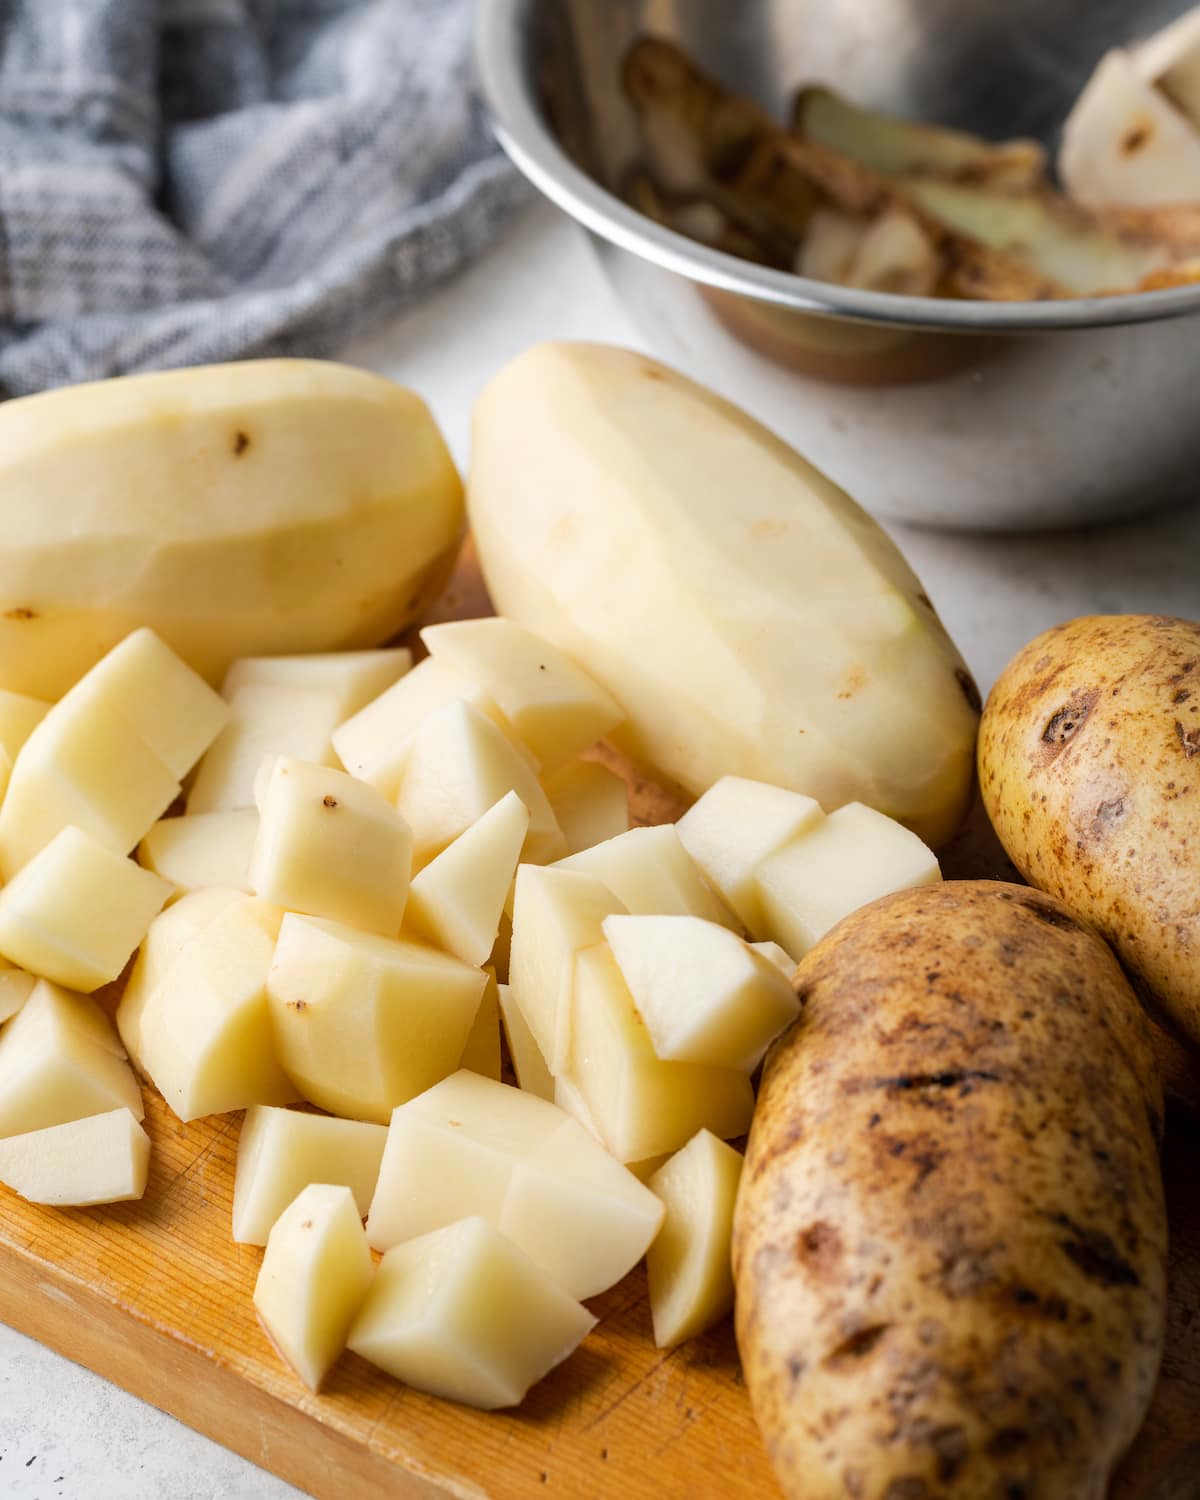 Chopped potatoes on a cutting board next to whole peeled and unpeeled potatoes.